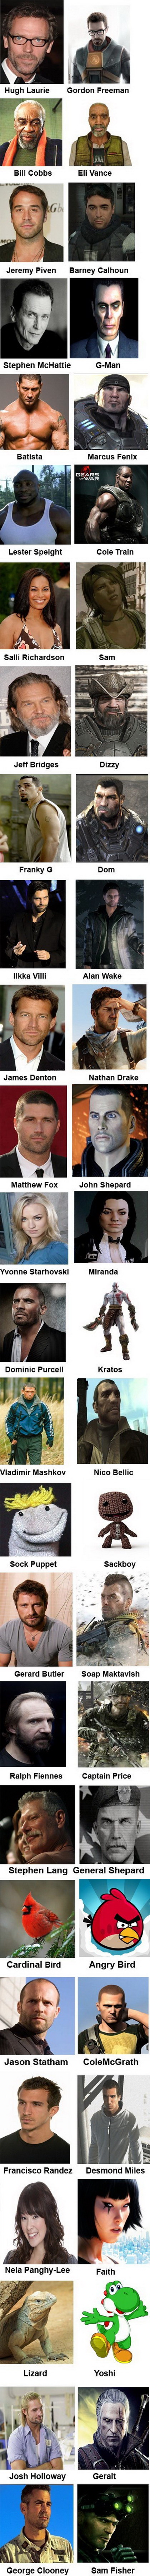 Actors for video game characters